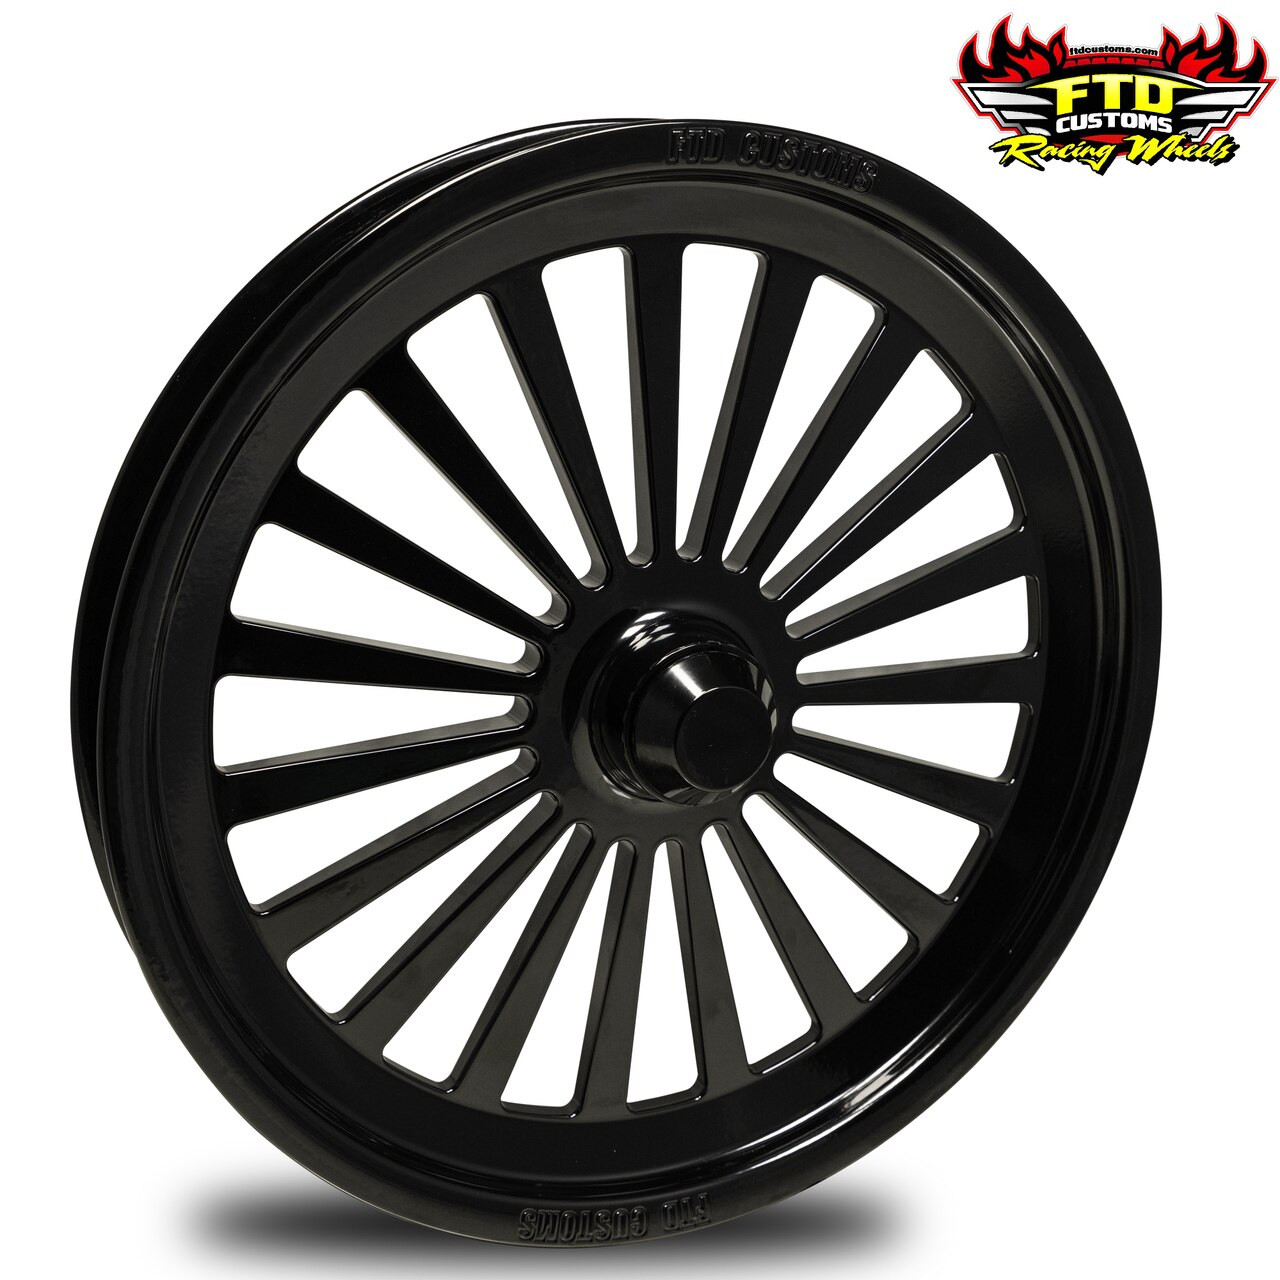 Mystic Spindle mount dragster front wheels Ftd Customs